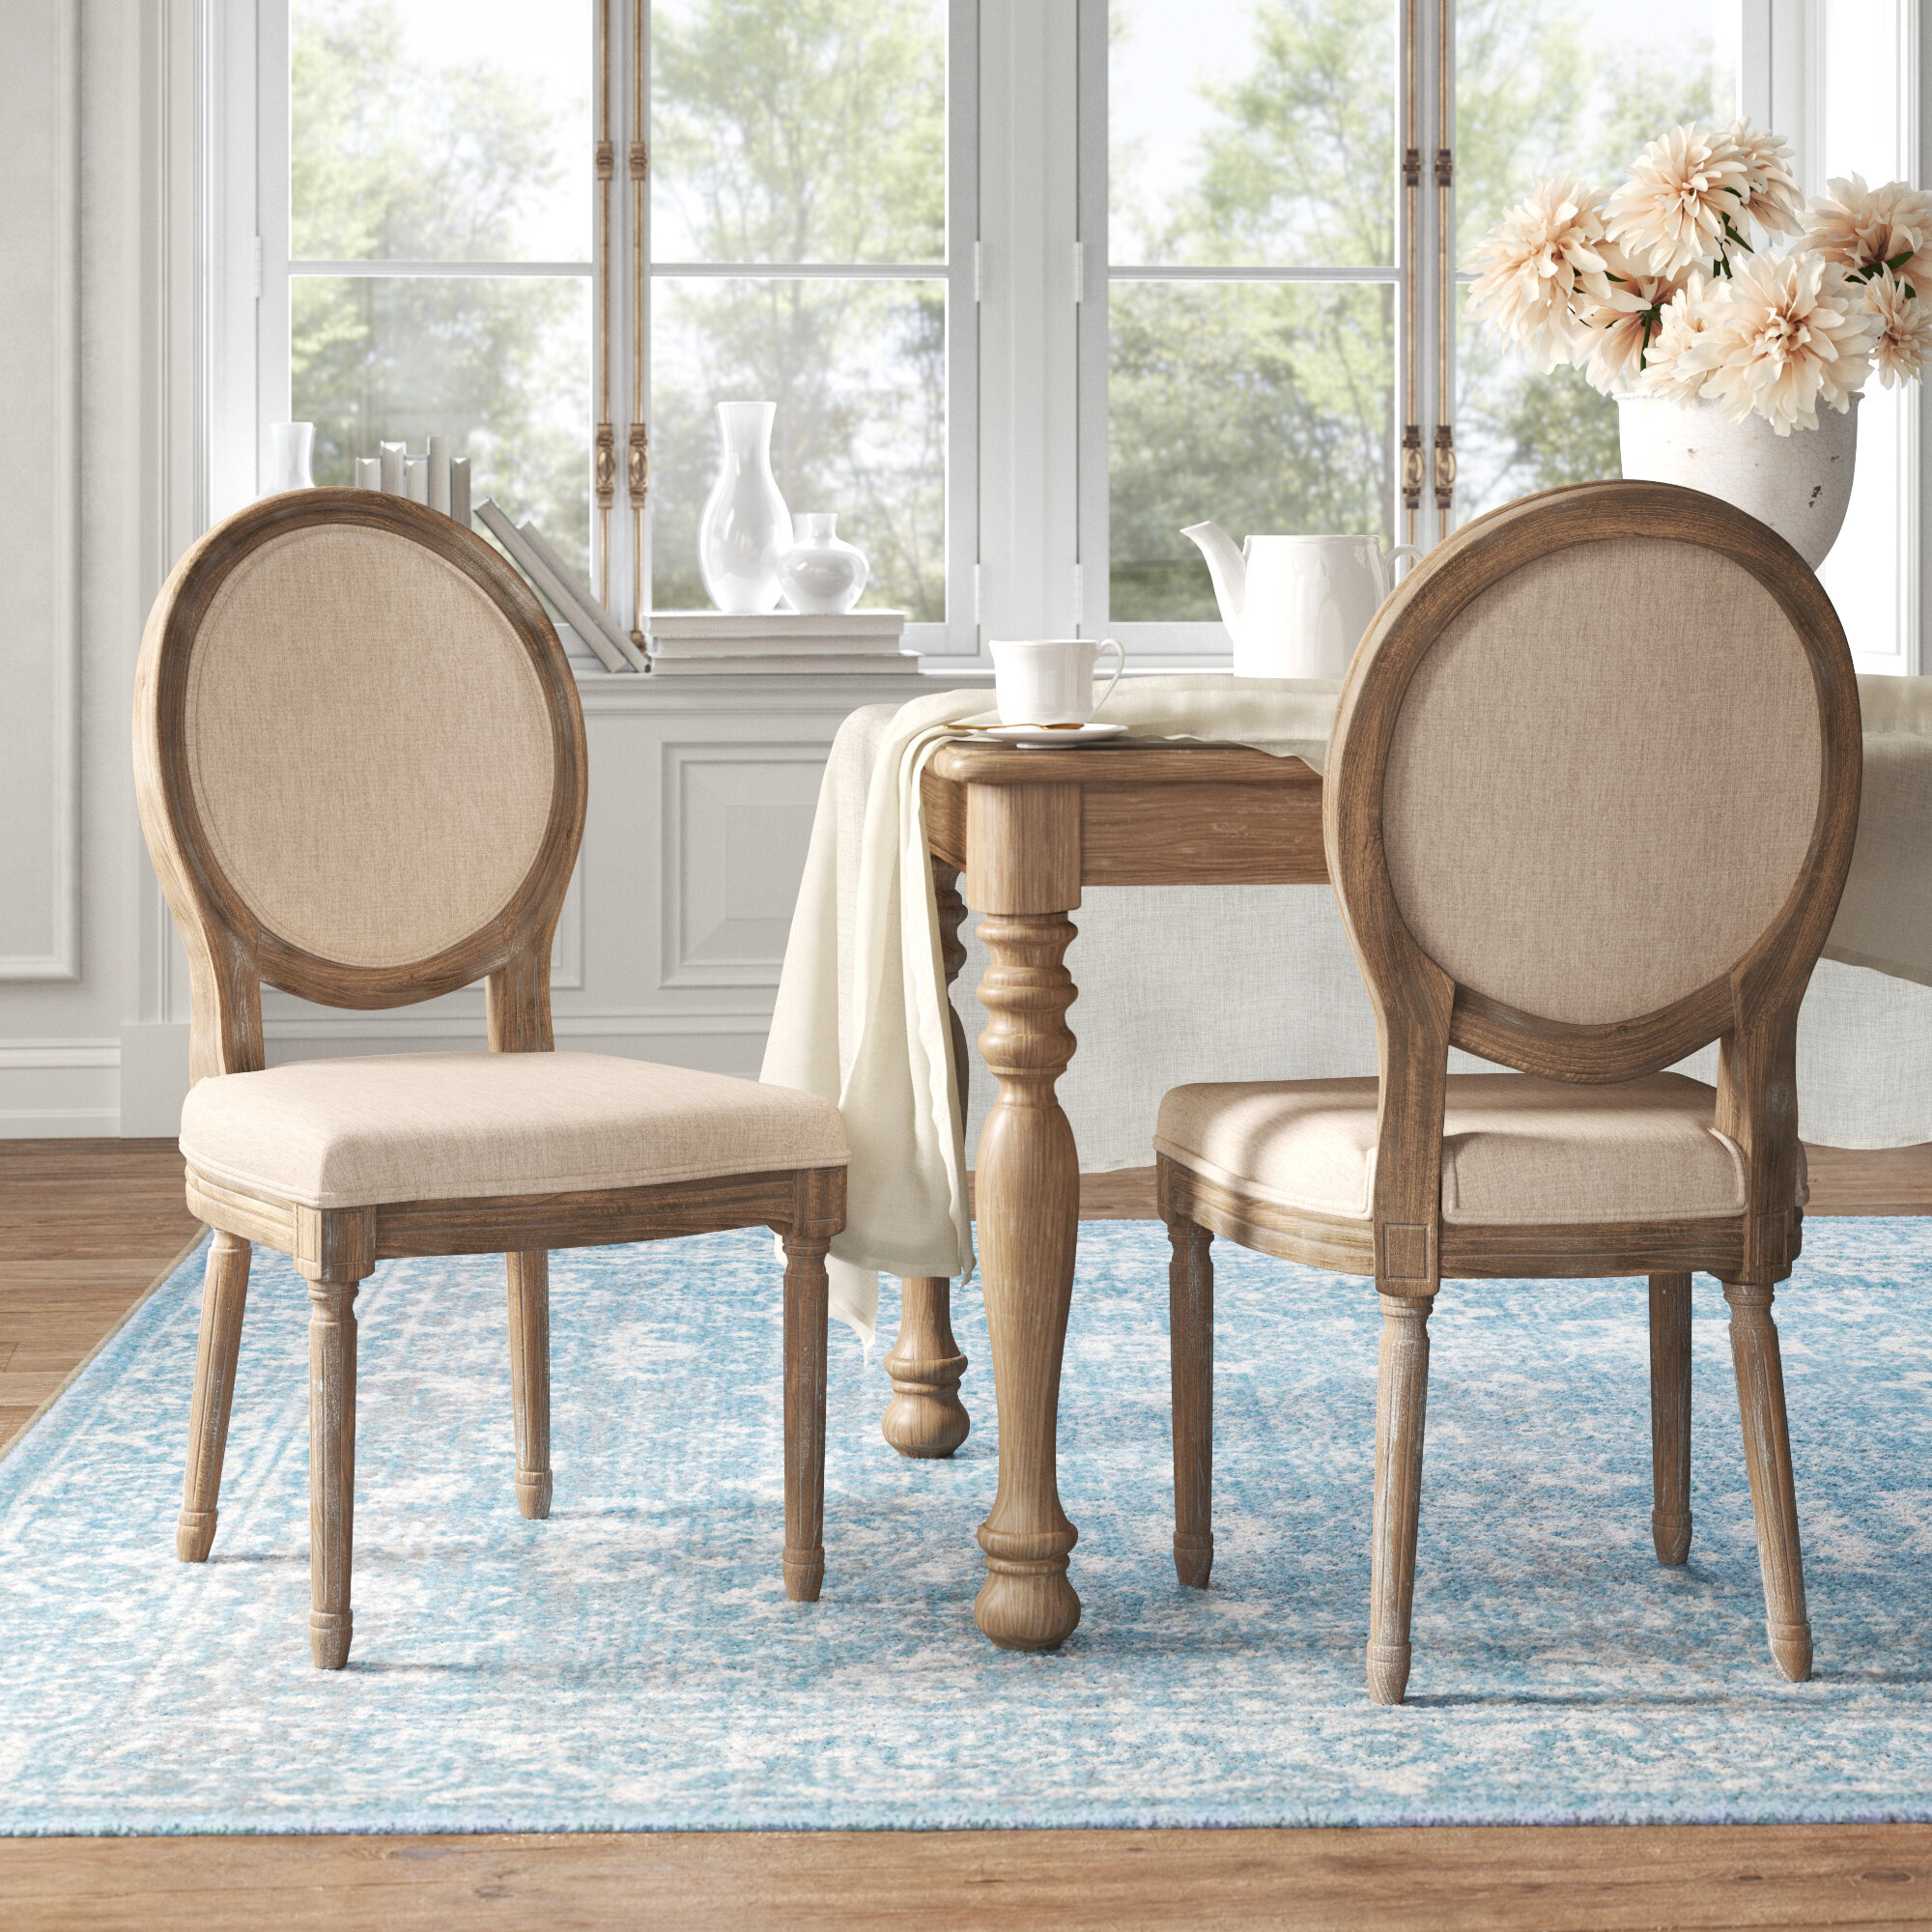 An Introduction to Louis XVI Style Furniture - French Country Furniture USA